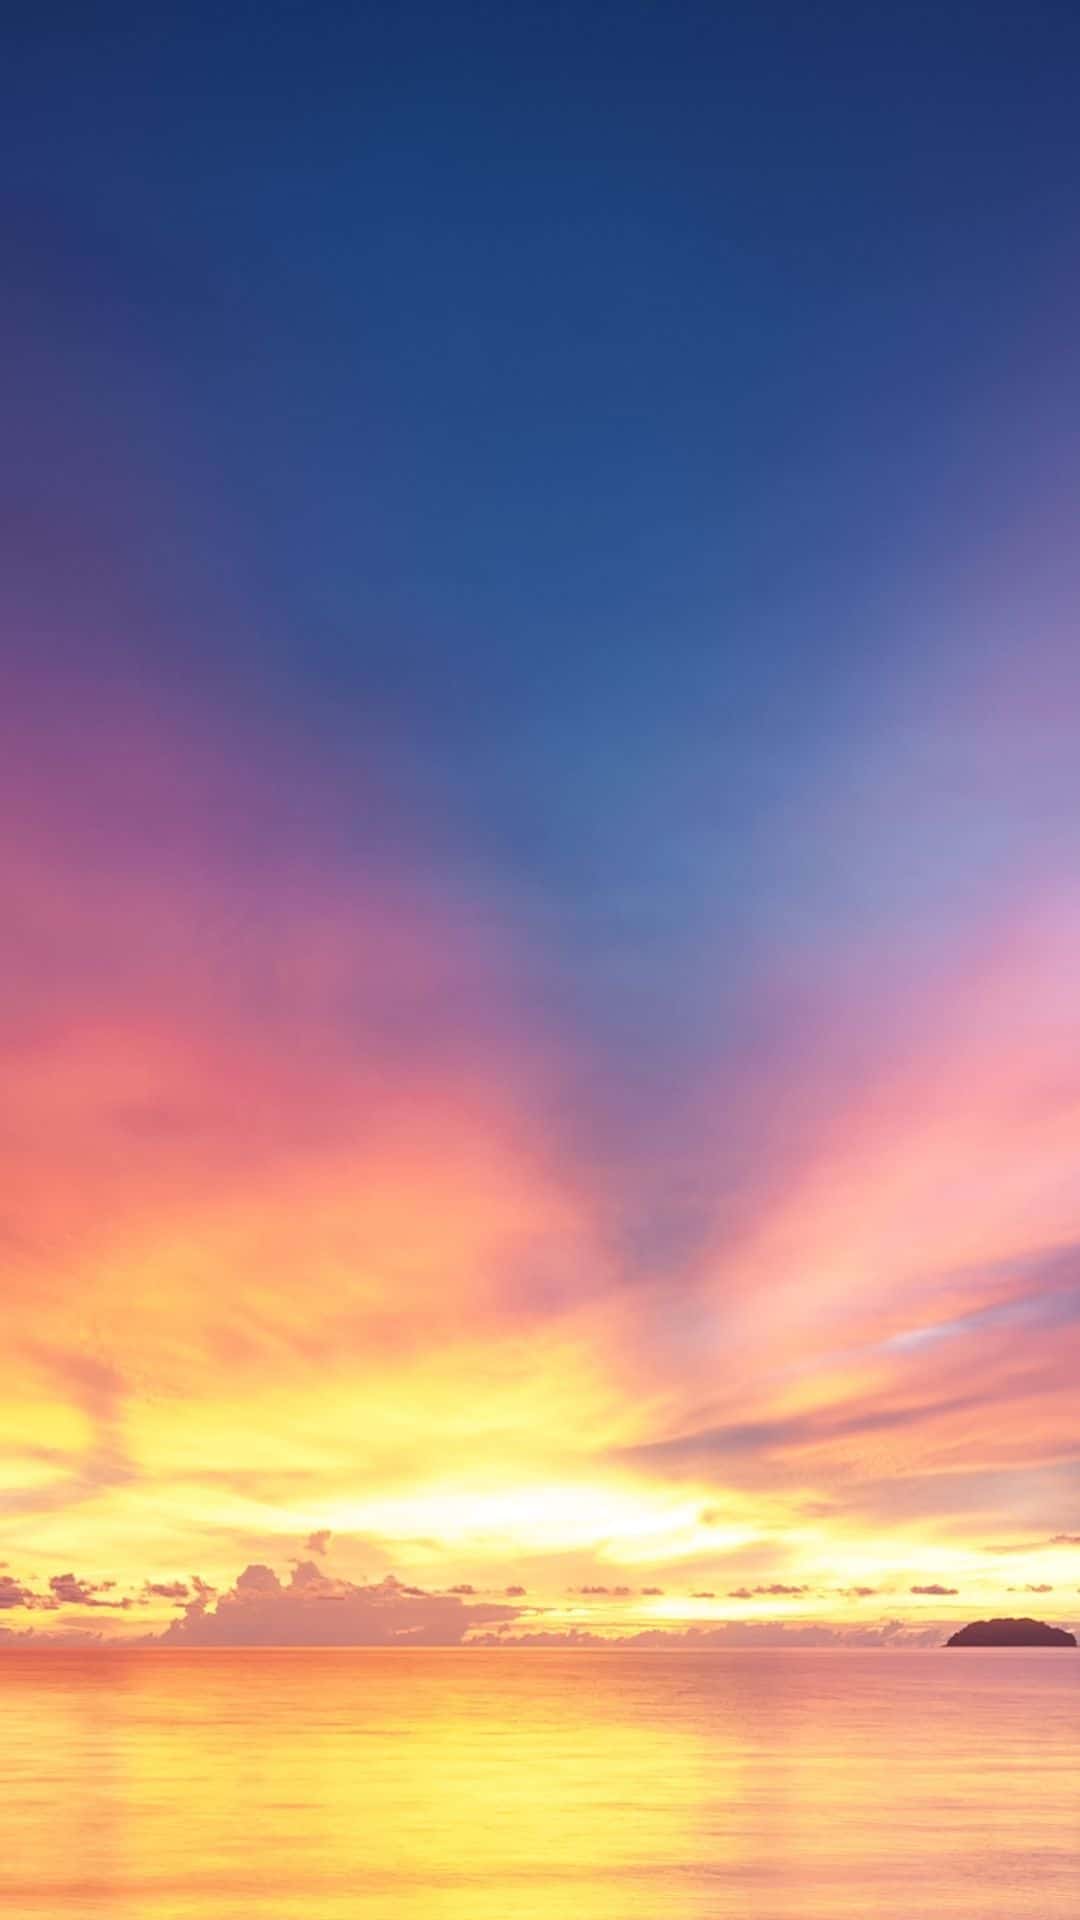 Sunset iPhone wallpaper. Sunset iPhone background